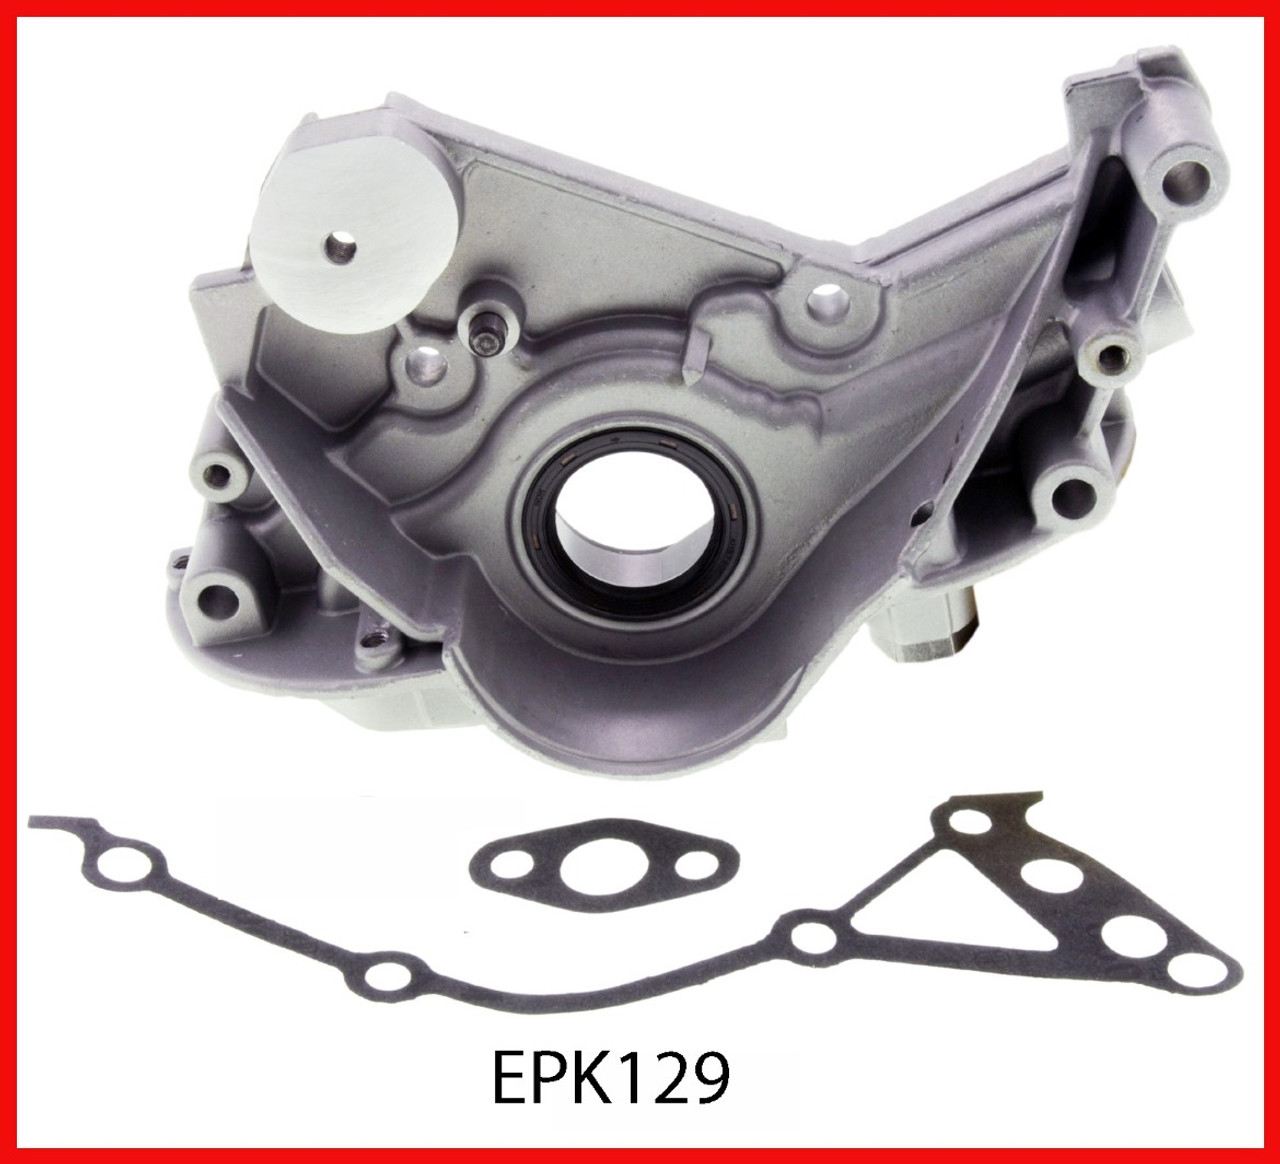 1991 Plymouth Voyager 3.0L Engine Oil Pump EPK129 -36